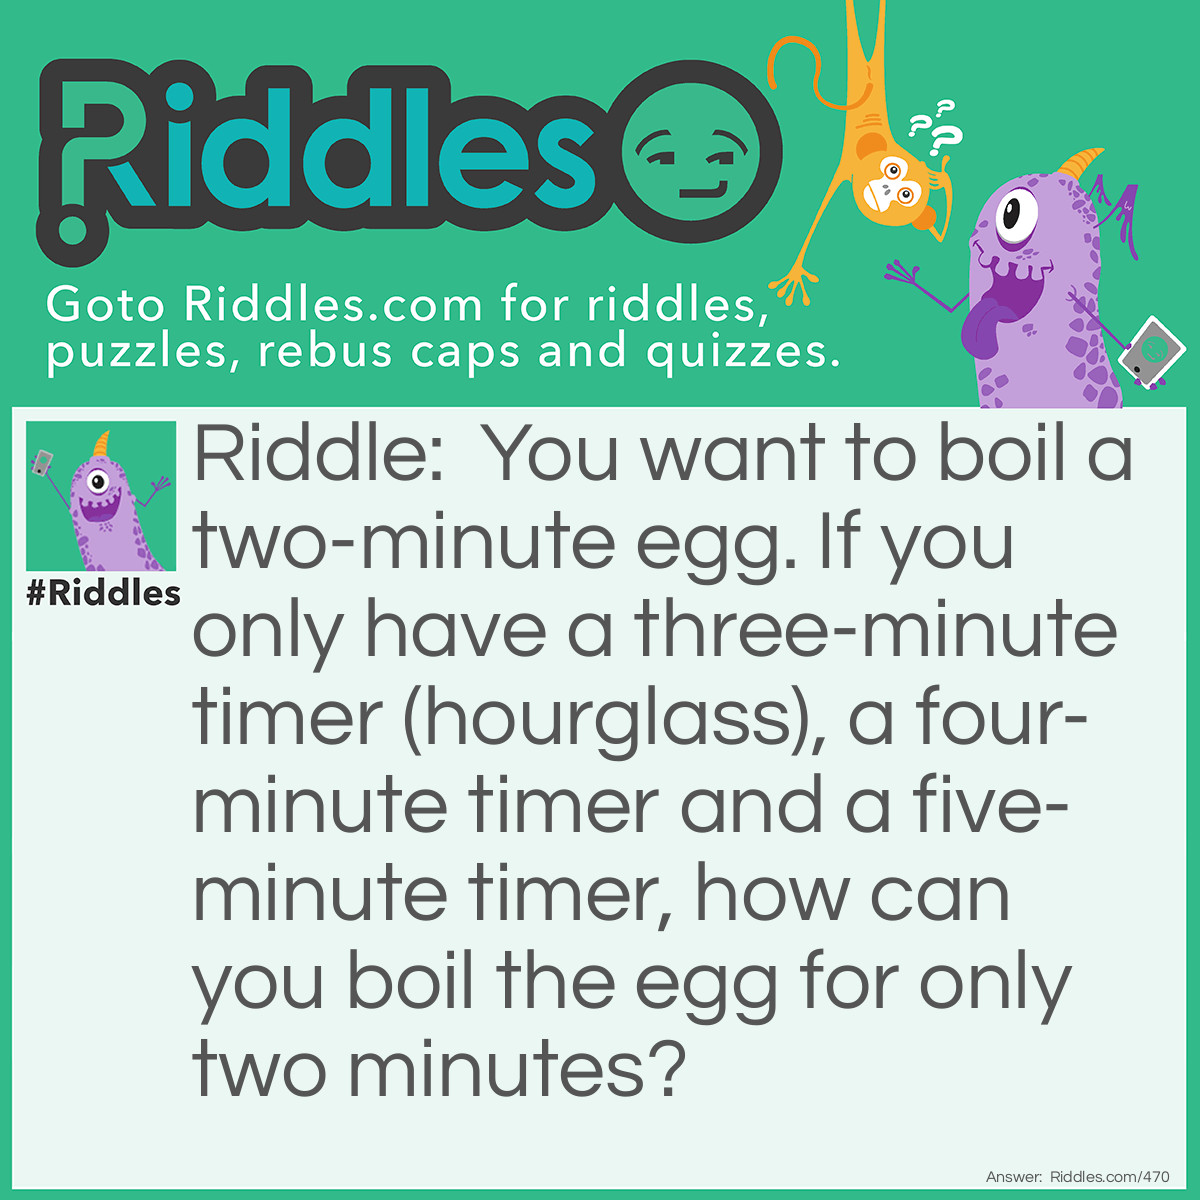 Riddle: You want to boil a two-minute egg. If you only have a three-minute timer (hourglass), a four-minute timer, and a five-minute timer, how can you boil the egg for only two minutes? Answer: Once the water is boiling, turn the three-minute timer and five-minute timer over. When the three-minute timer runs out, put the egg in the boiling water. When the five-minute timer runs out, two minutes have elapsed and it is time to take the egg out of the water. You don't need the four-minute timer for this riddle.